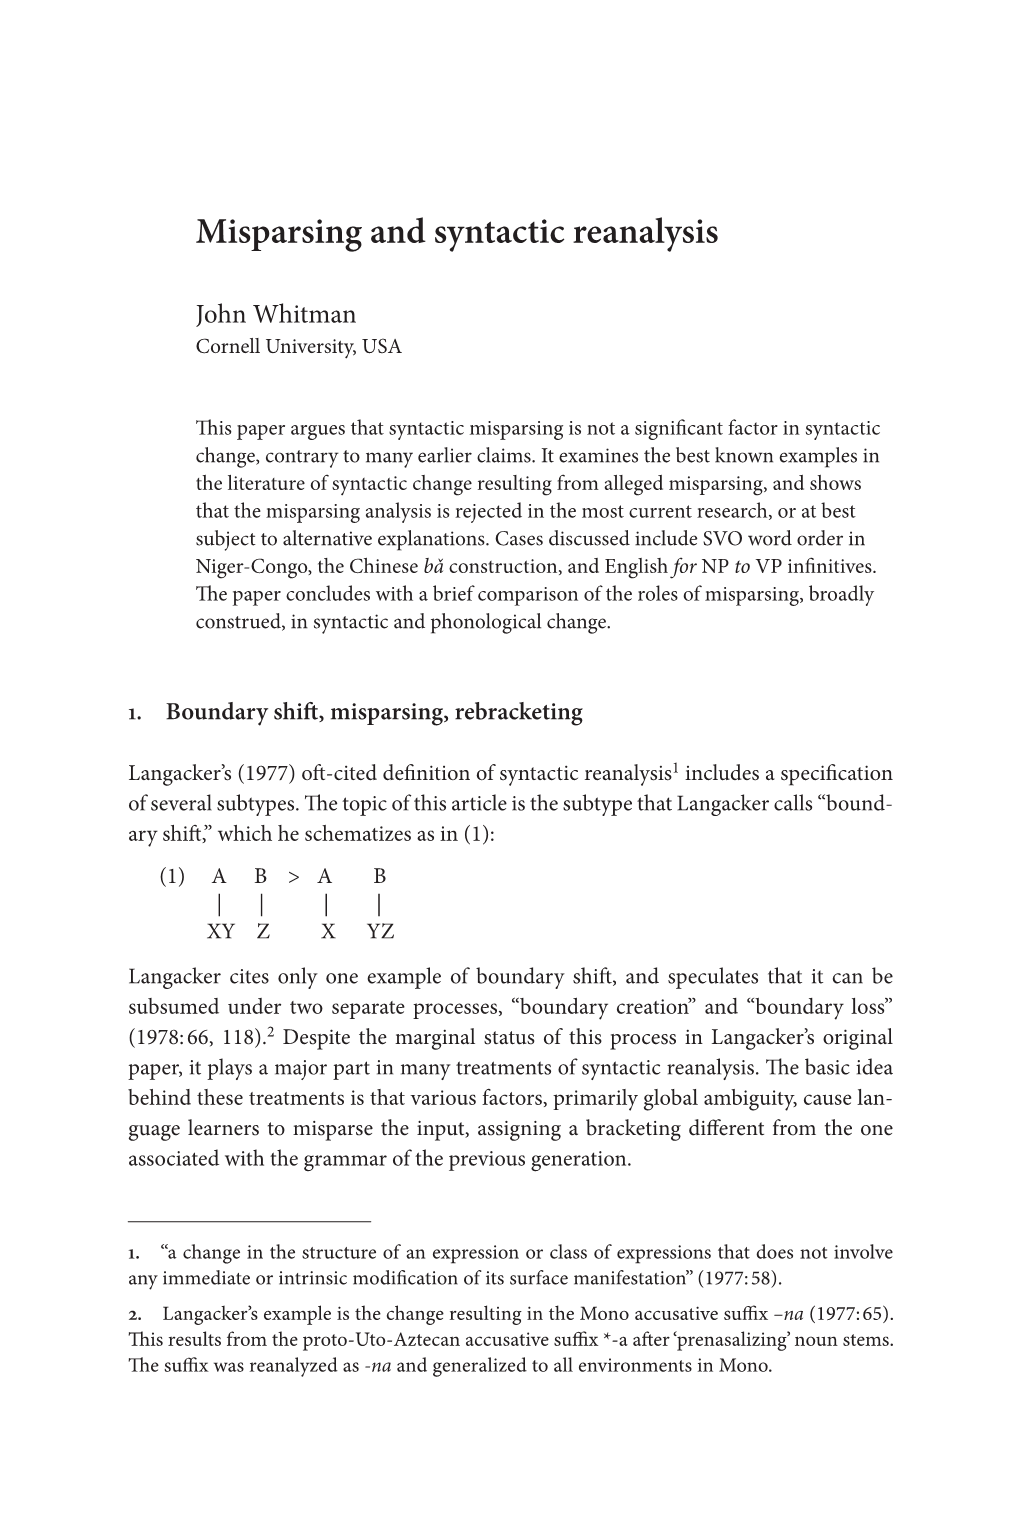 Misparsing and Syntactic Reanalysis